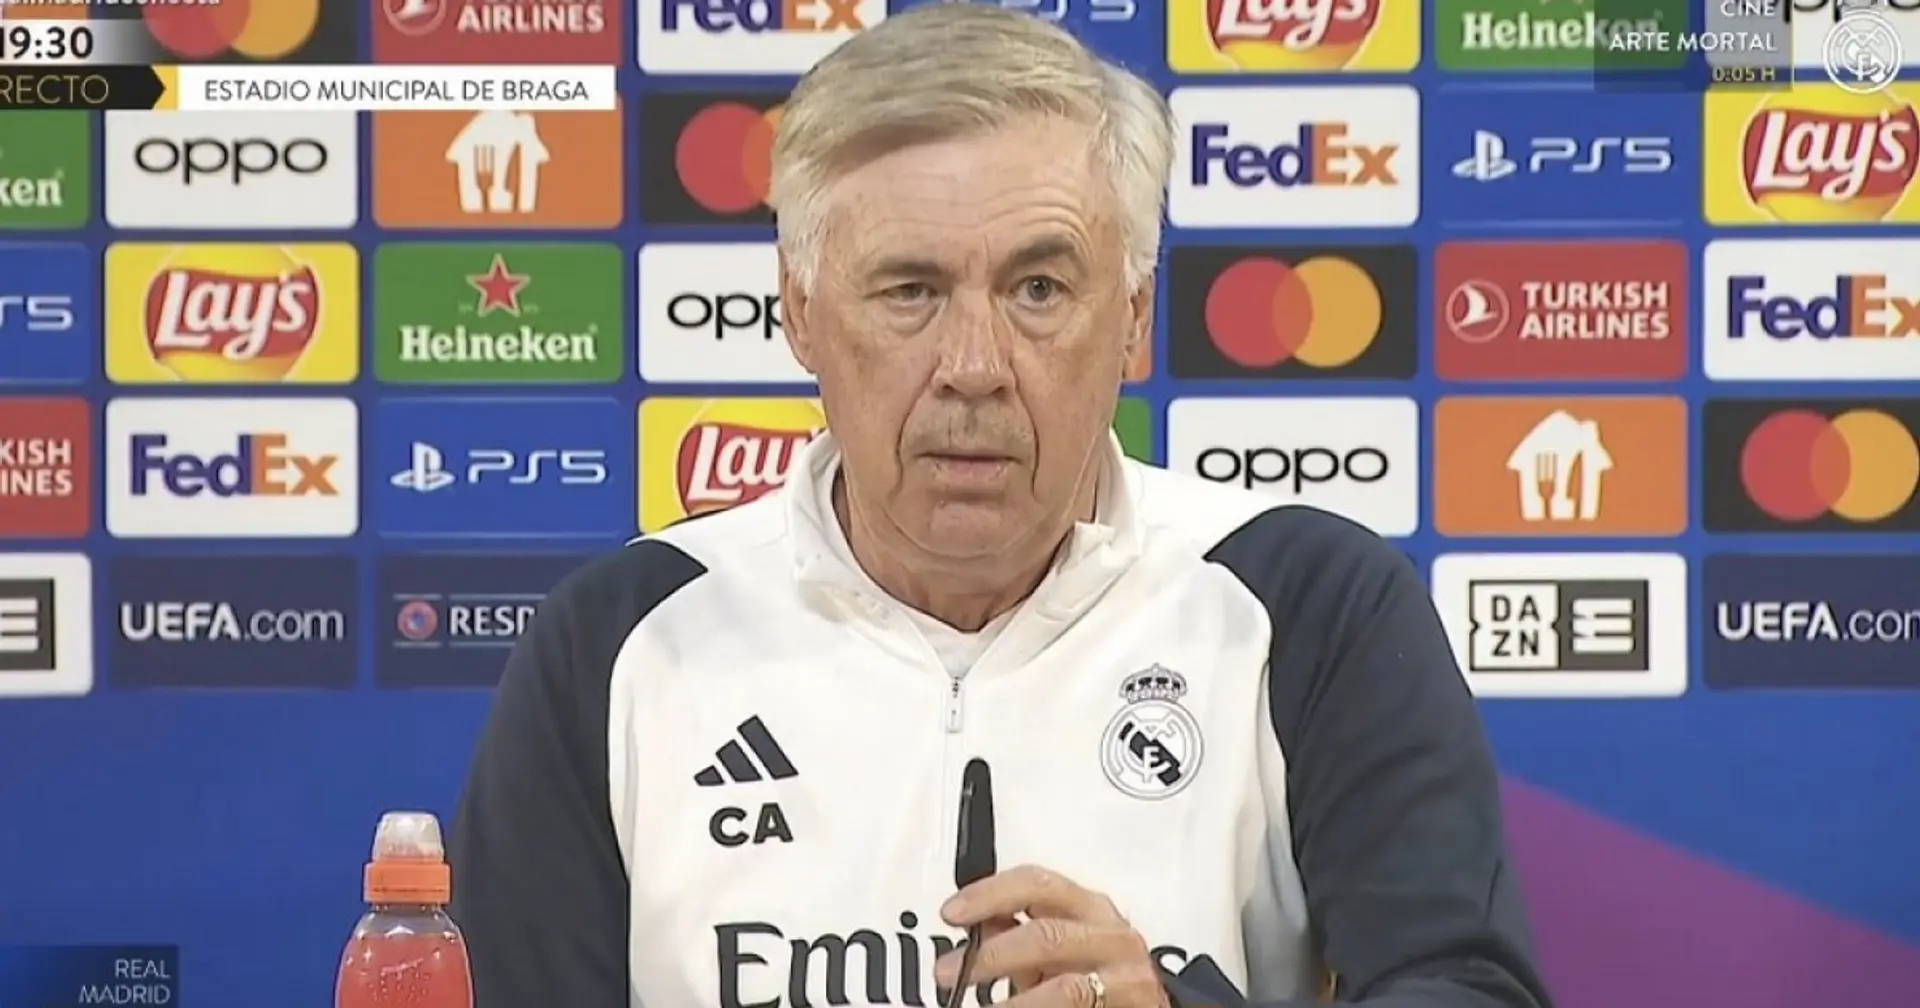 Ancelotti reveals if he will rotate squad v Braga with Clasico in mind